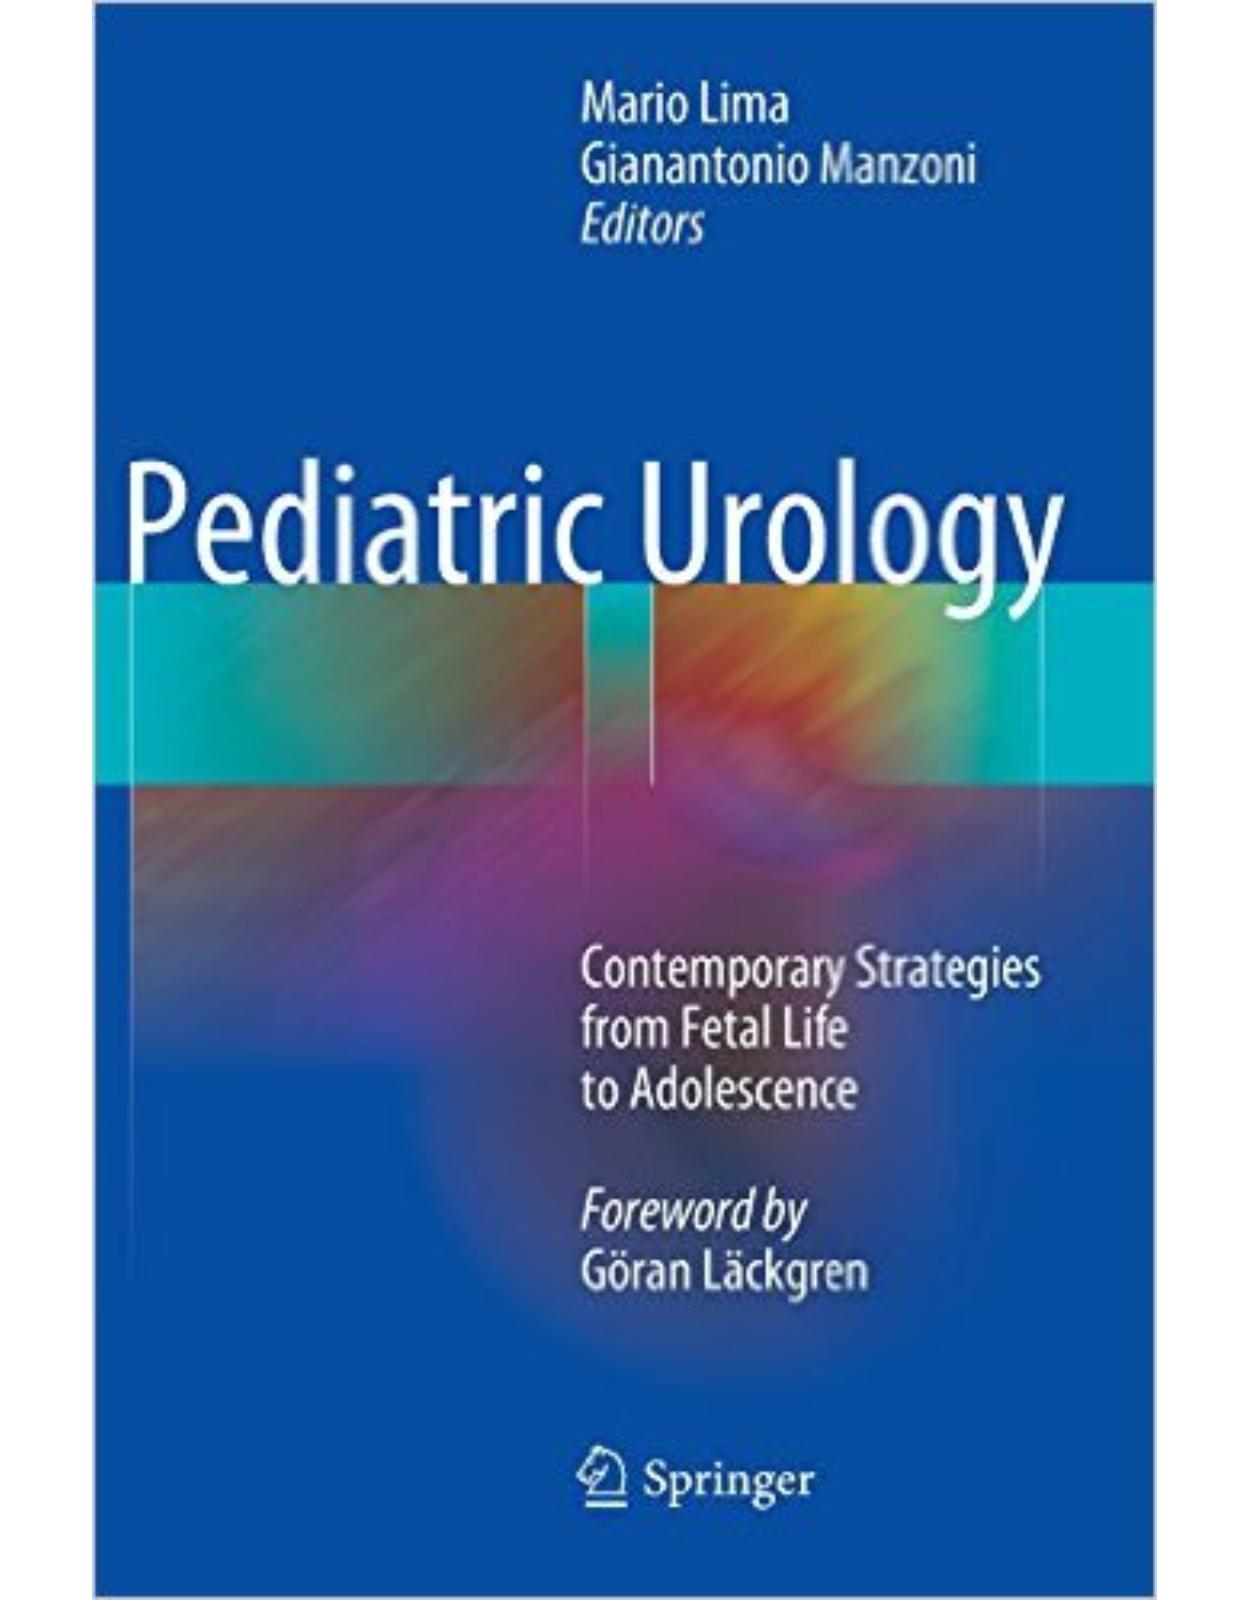 Pediatric Urology: Contemporary Strategies from Fetal Life to Adolescence 2015th Edition